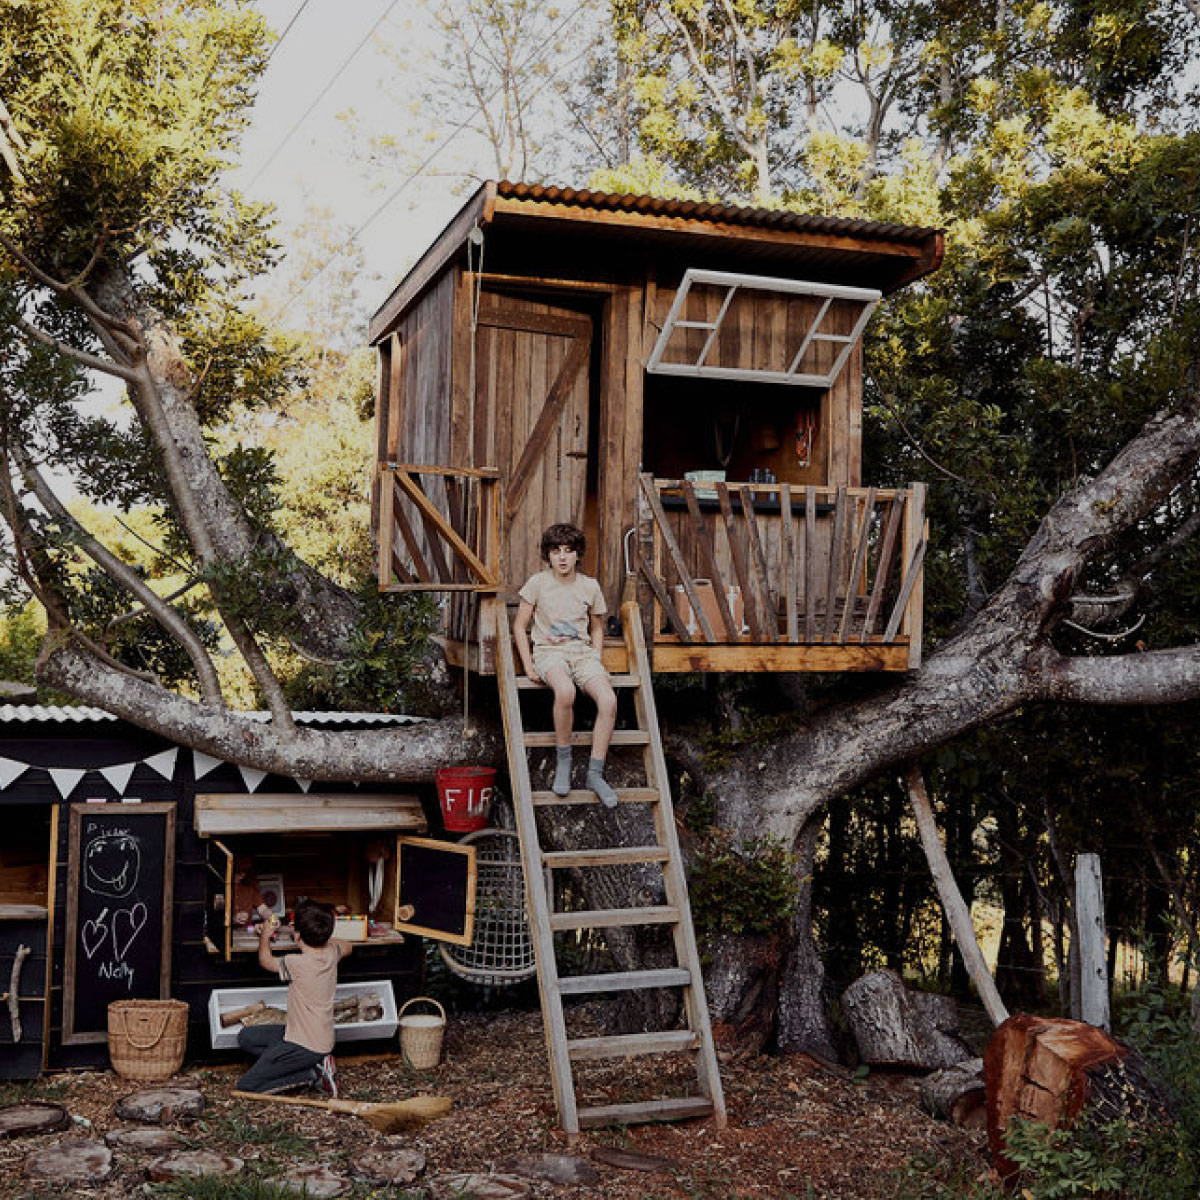 A boy sitting on the ladder to the treehouse, raised cubby house